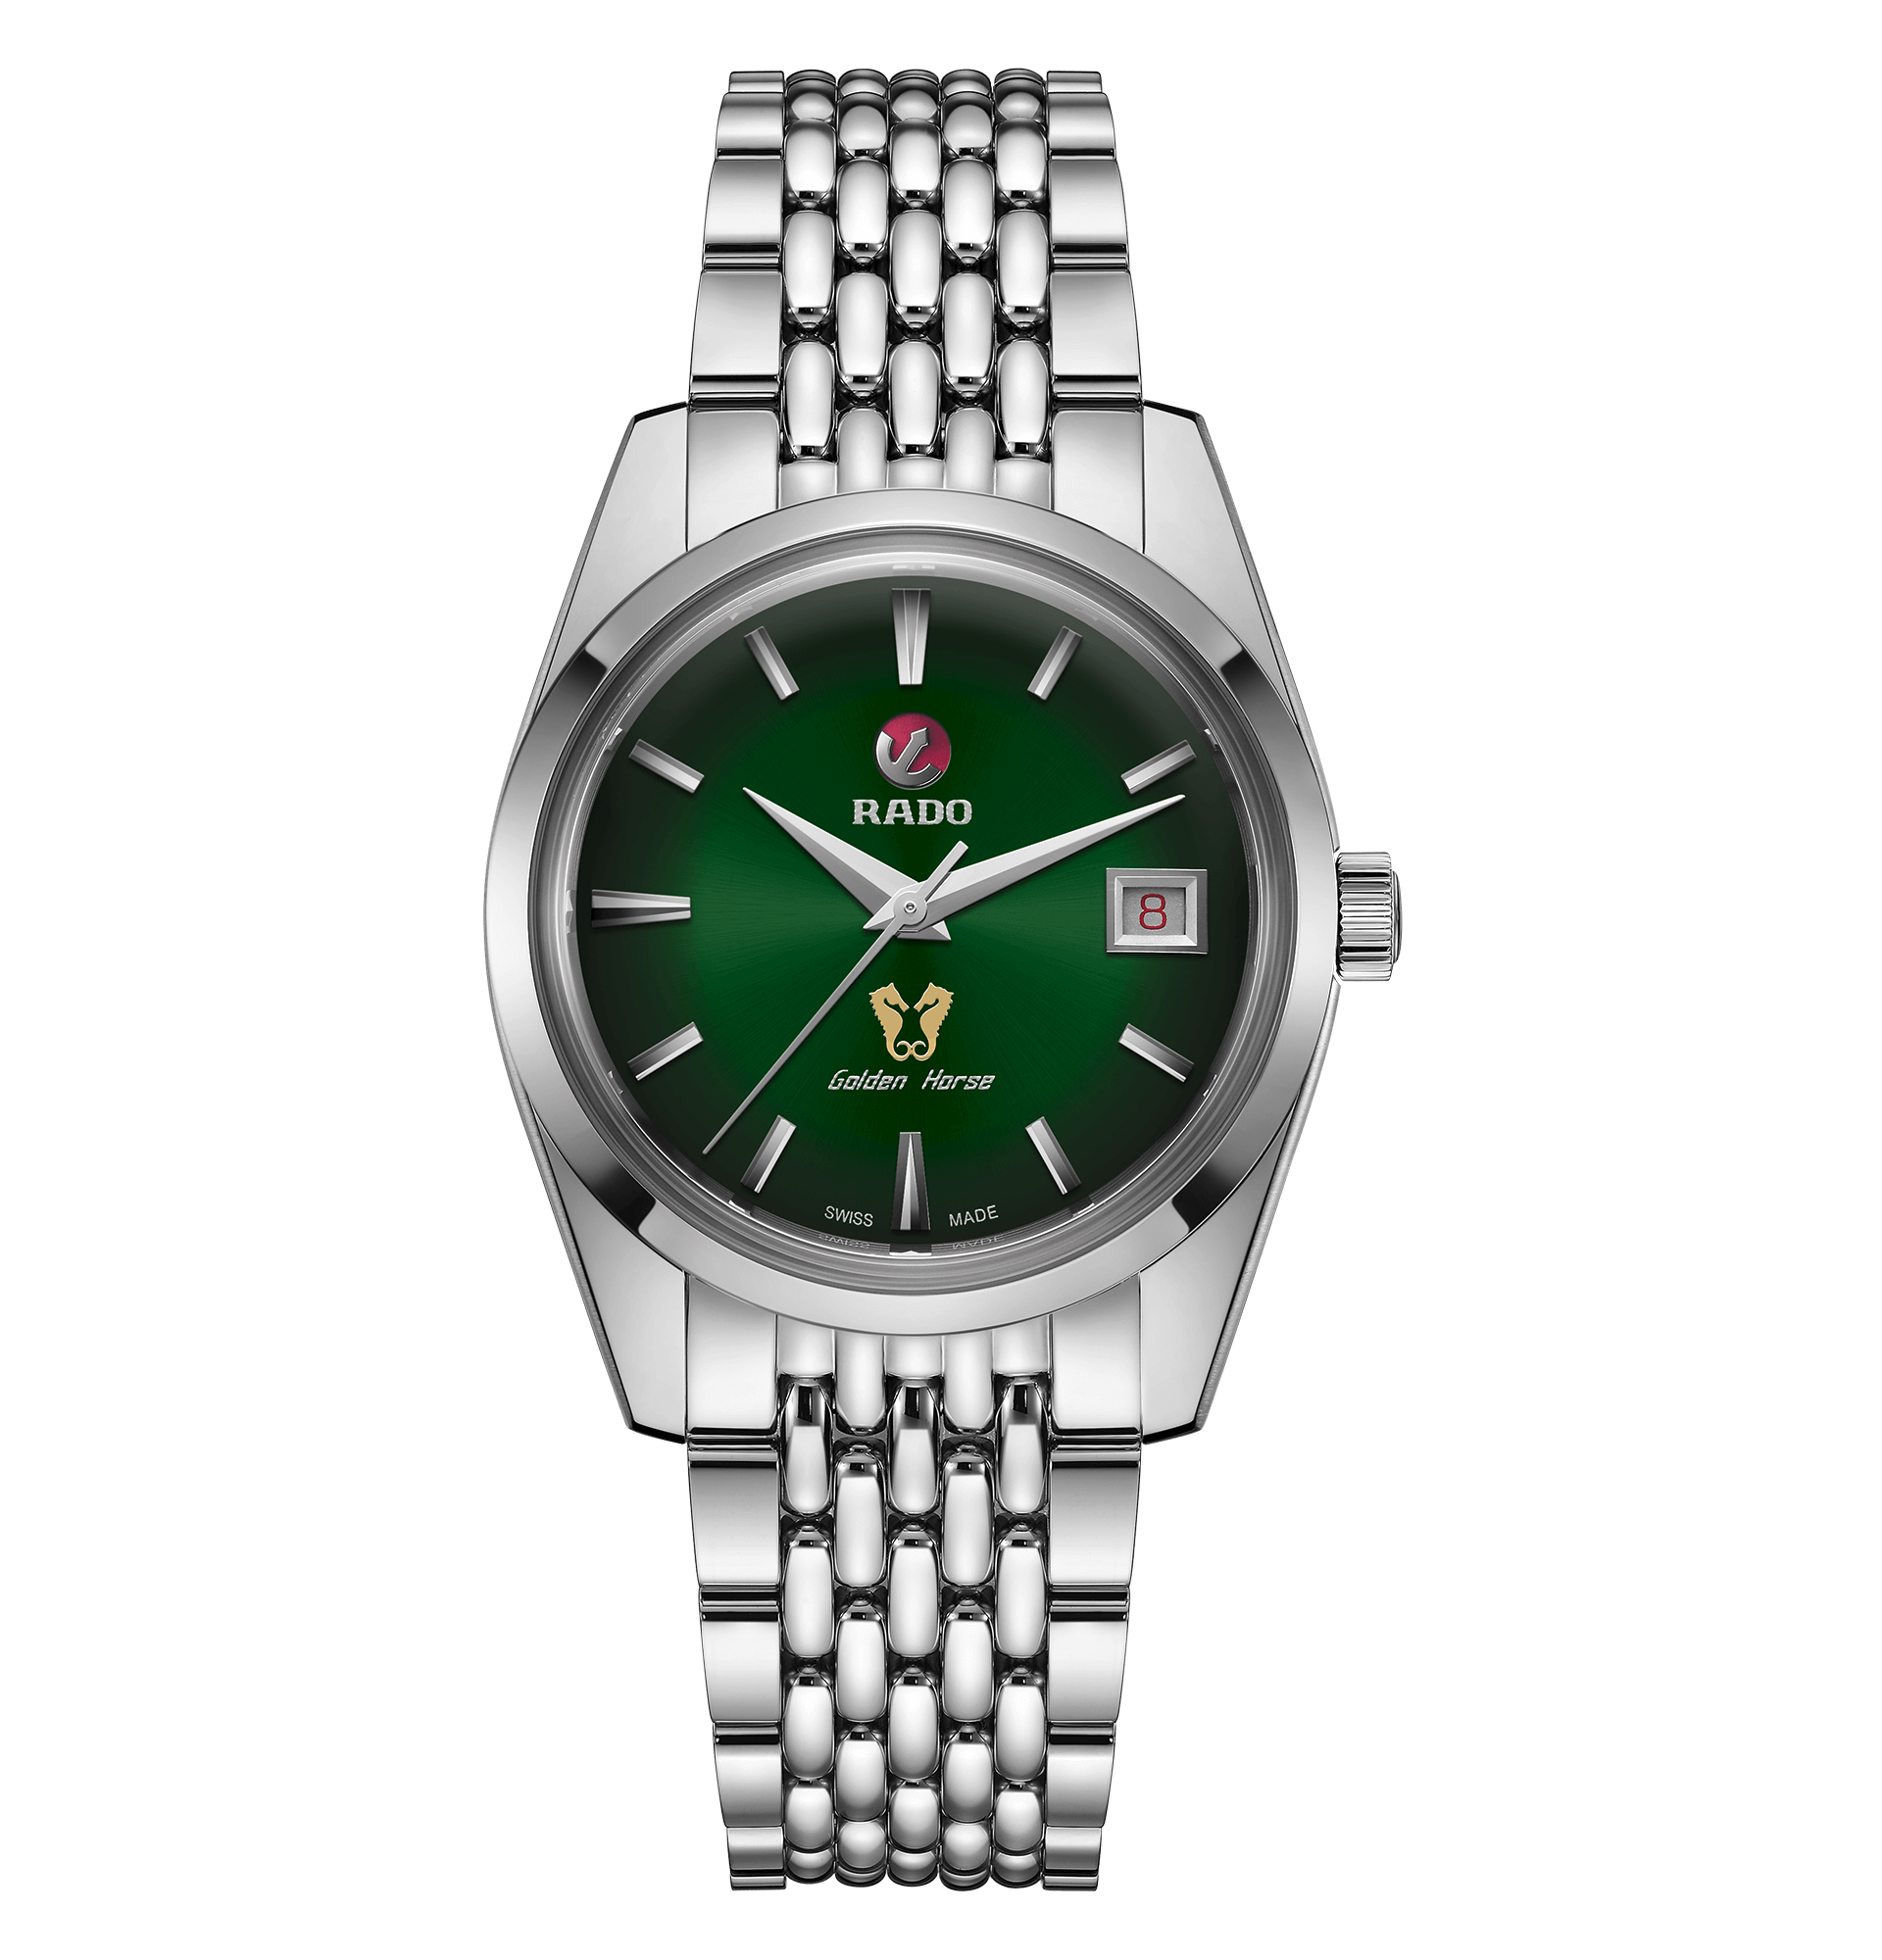 RADO Golden Horse 1957 Limited Edition Green Dial Stainless Steel Unisex Watch R33930313